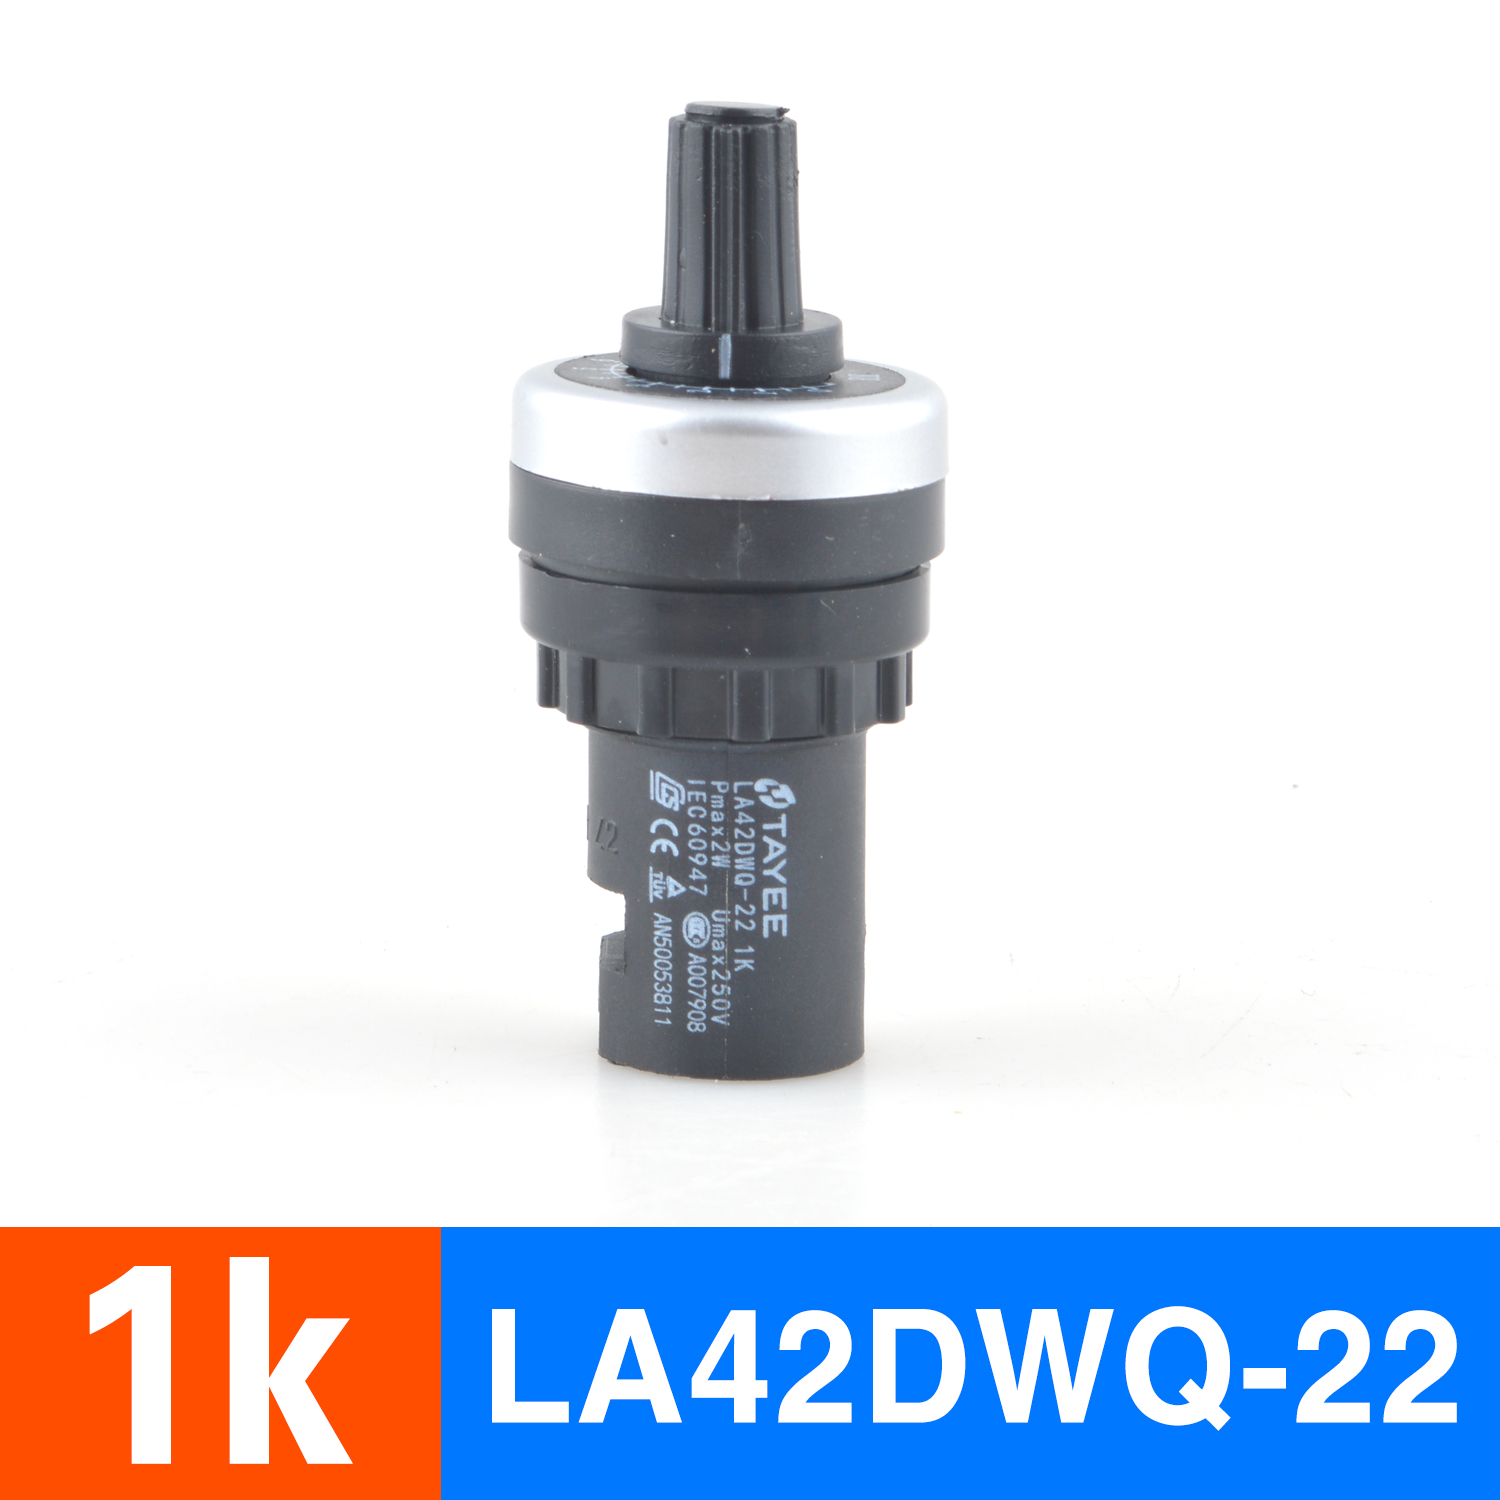 Genuine 1Kquality goods Shanghai Tianyi Frequency converter adjust speed potentiometer precise LA42DWQ-22 governor 22mm5K10K